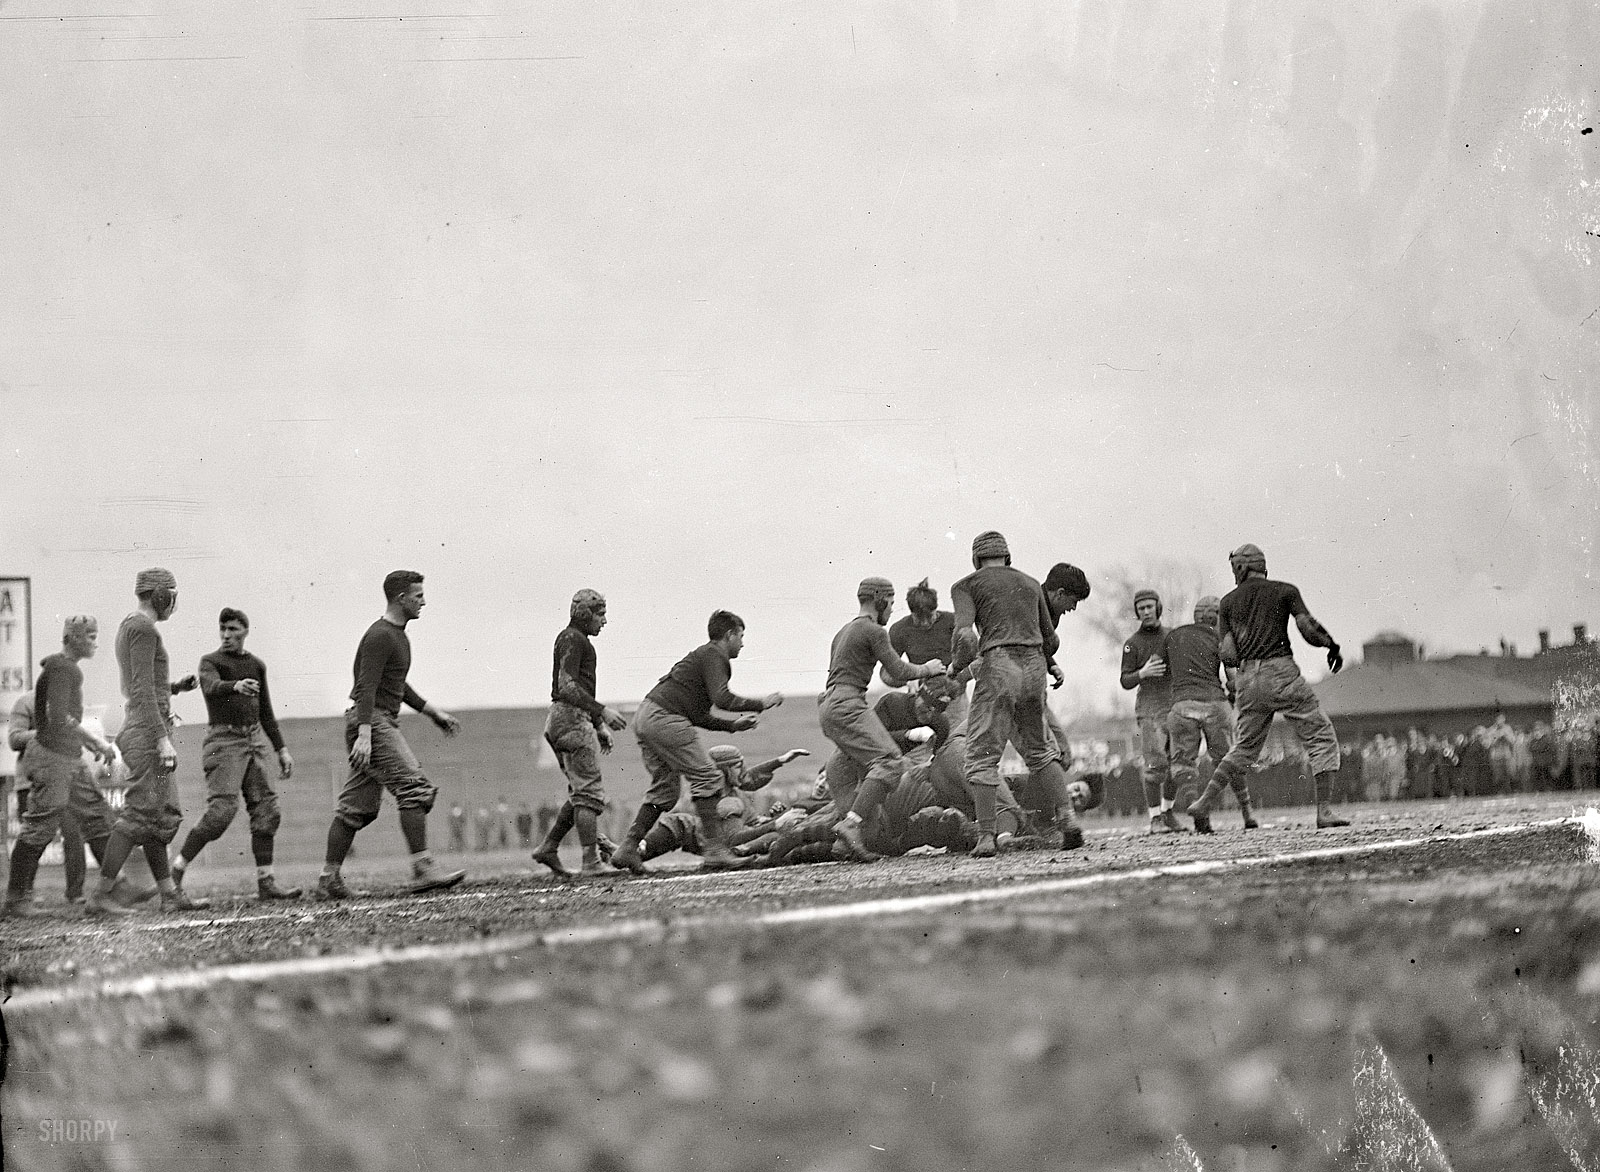 Washington, D.C. "Football. University of Virginia game, 1910." No nosebleed seats at this game. Harris & Ewing Collection glass negative. View full size.